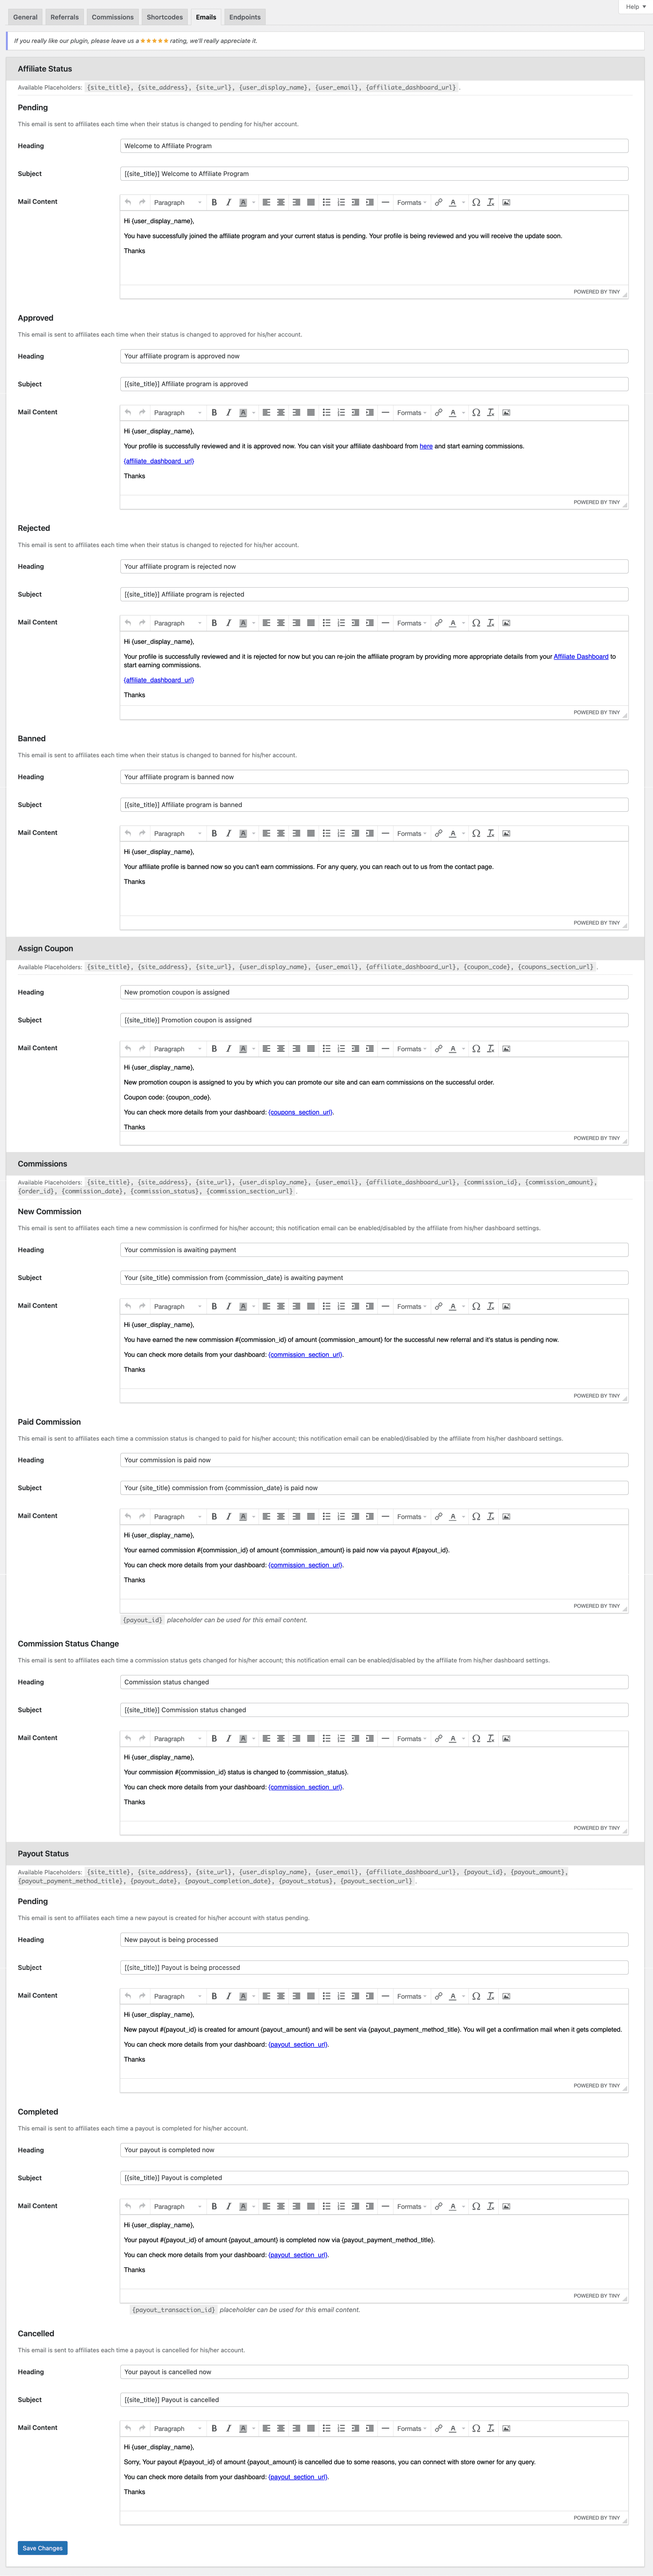 Emails Configuration Page